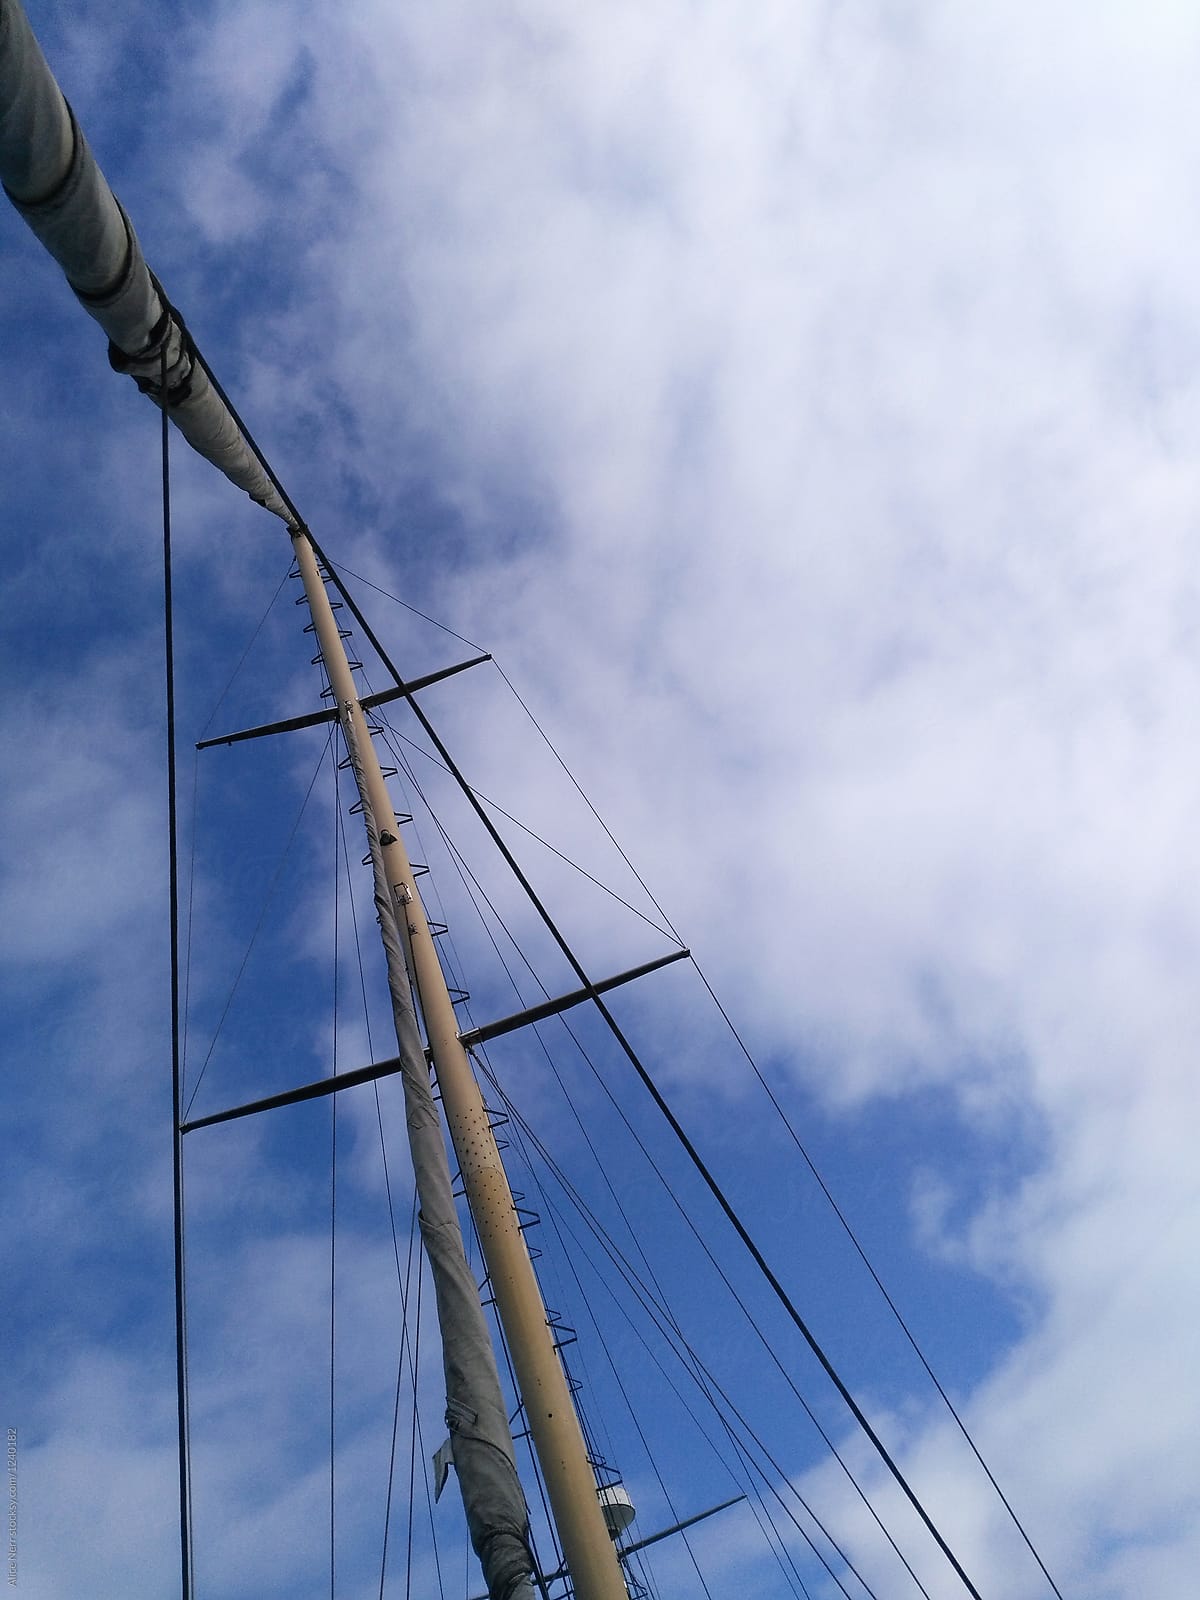 Bottom-up view to mast and cables at the sailing boat